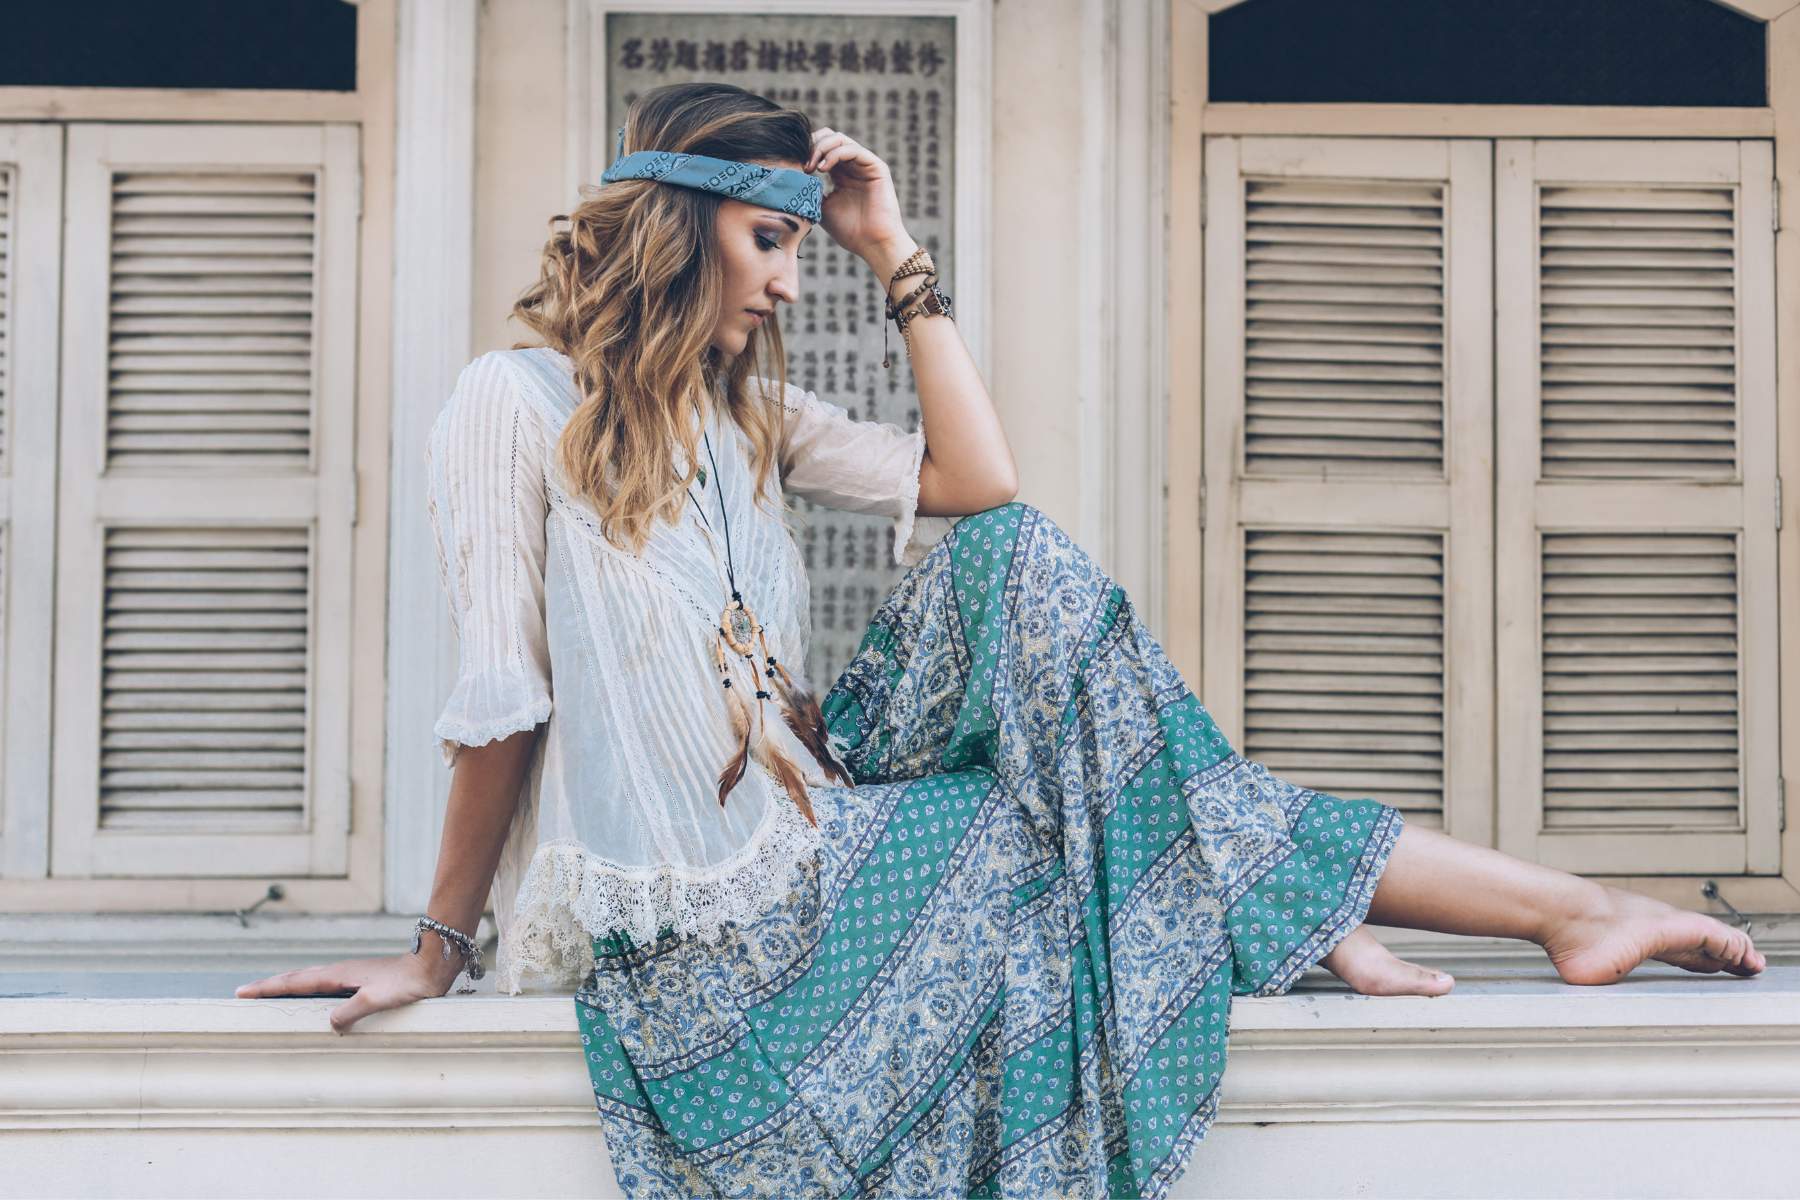 How to Dress in Boho Style Clothes